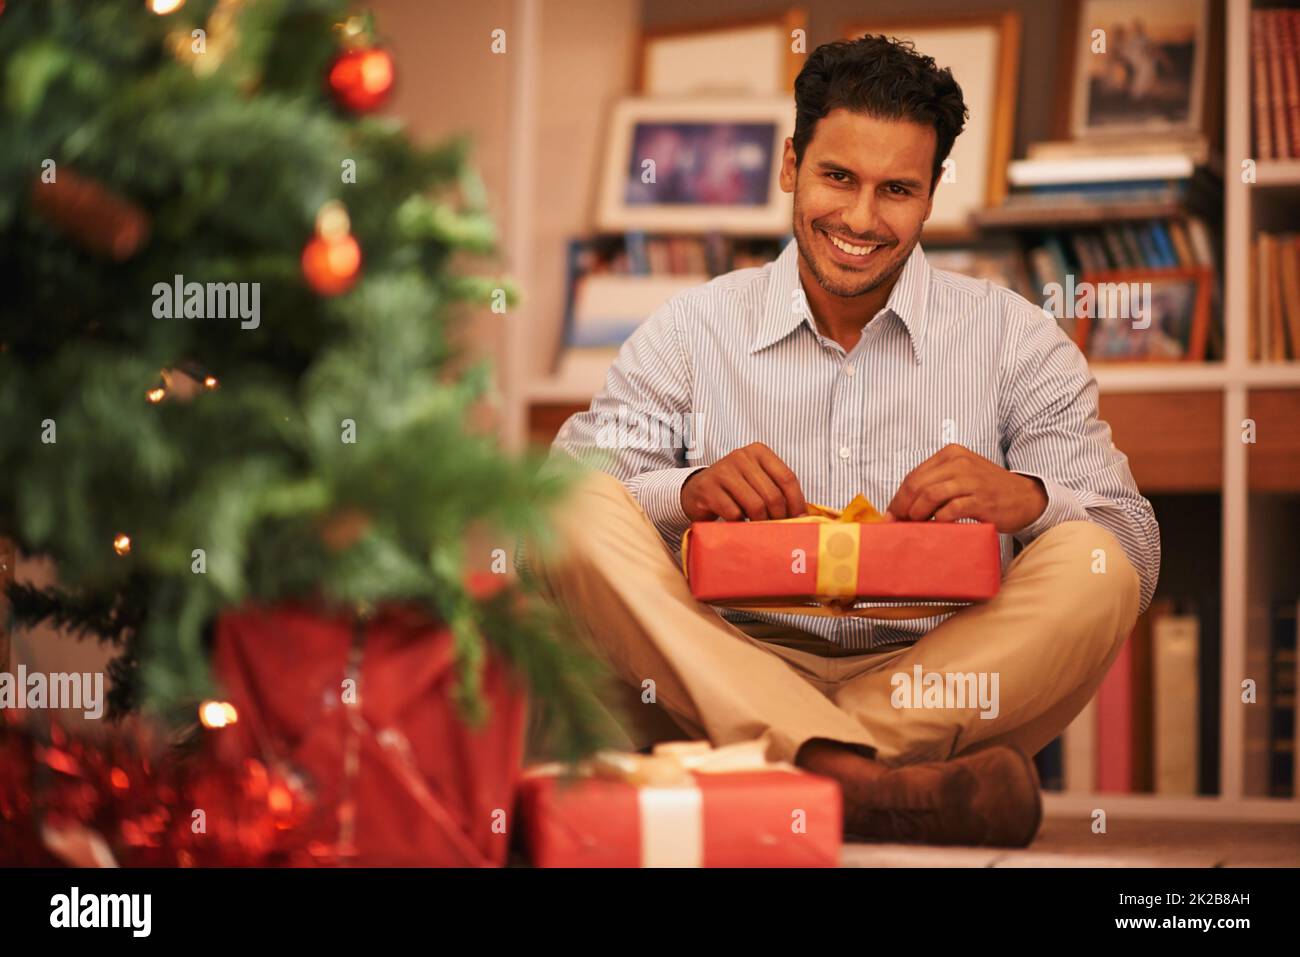 Everyone feels like a kid at christmas time. Portrait of a young man sitting next to the tree opening christmas presents. Stock Photo